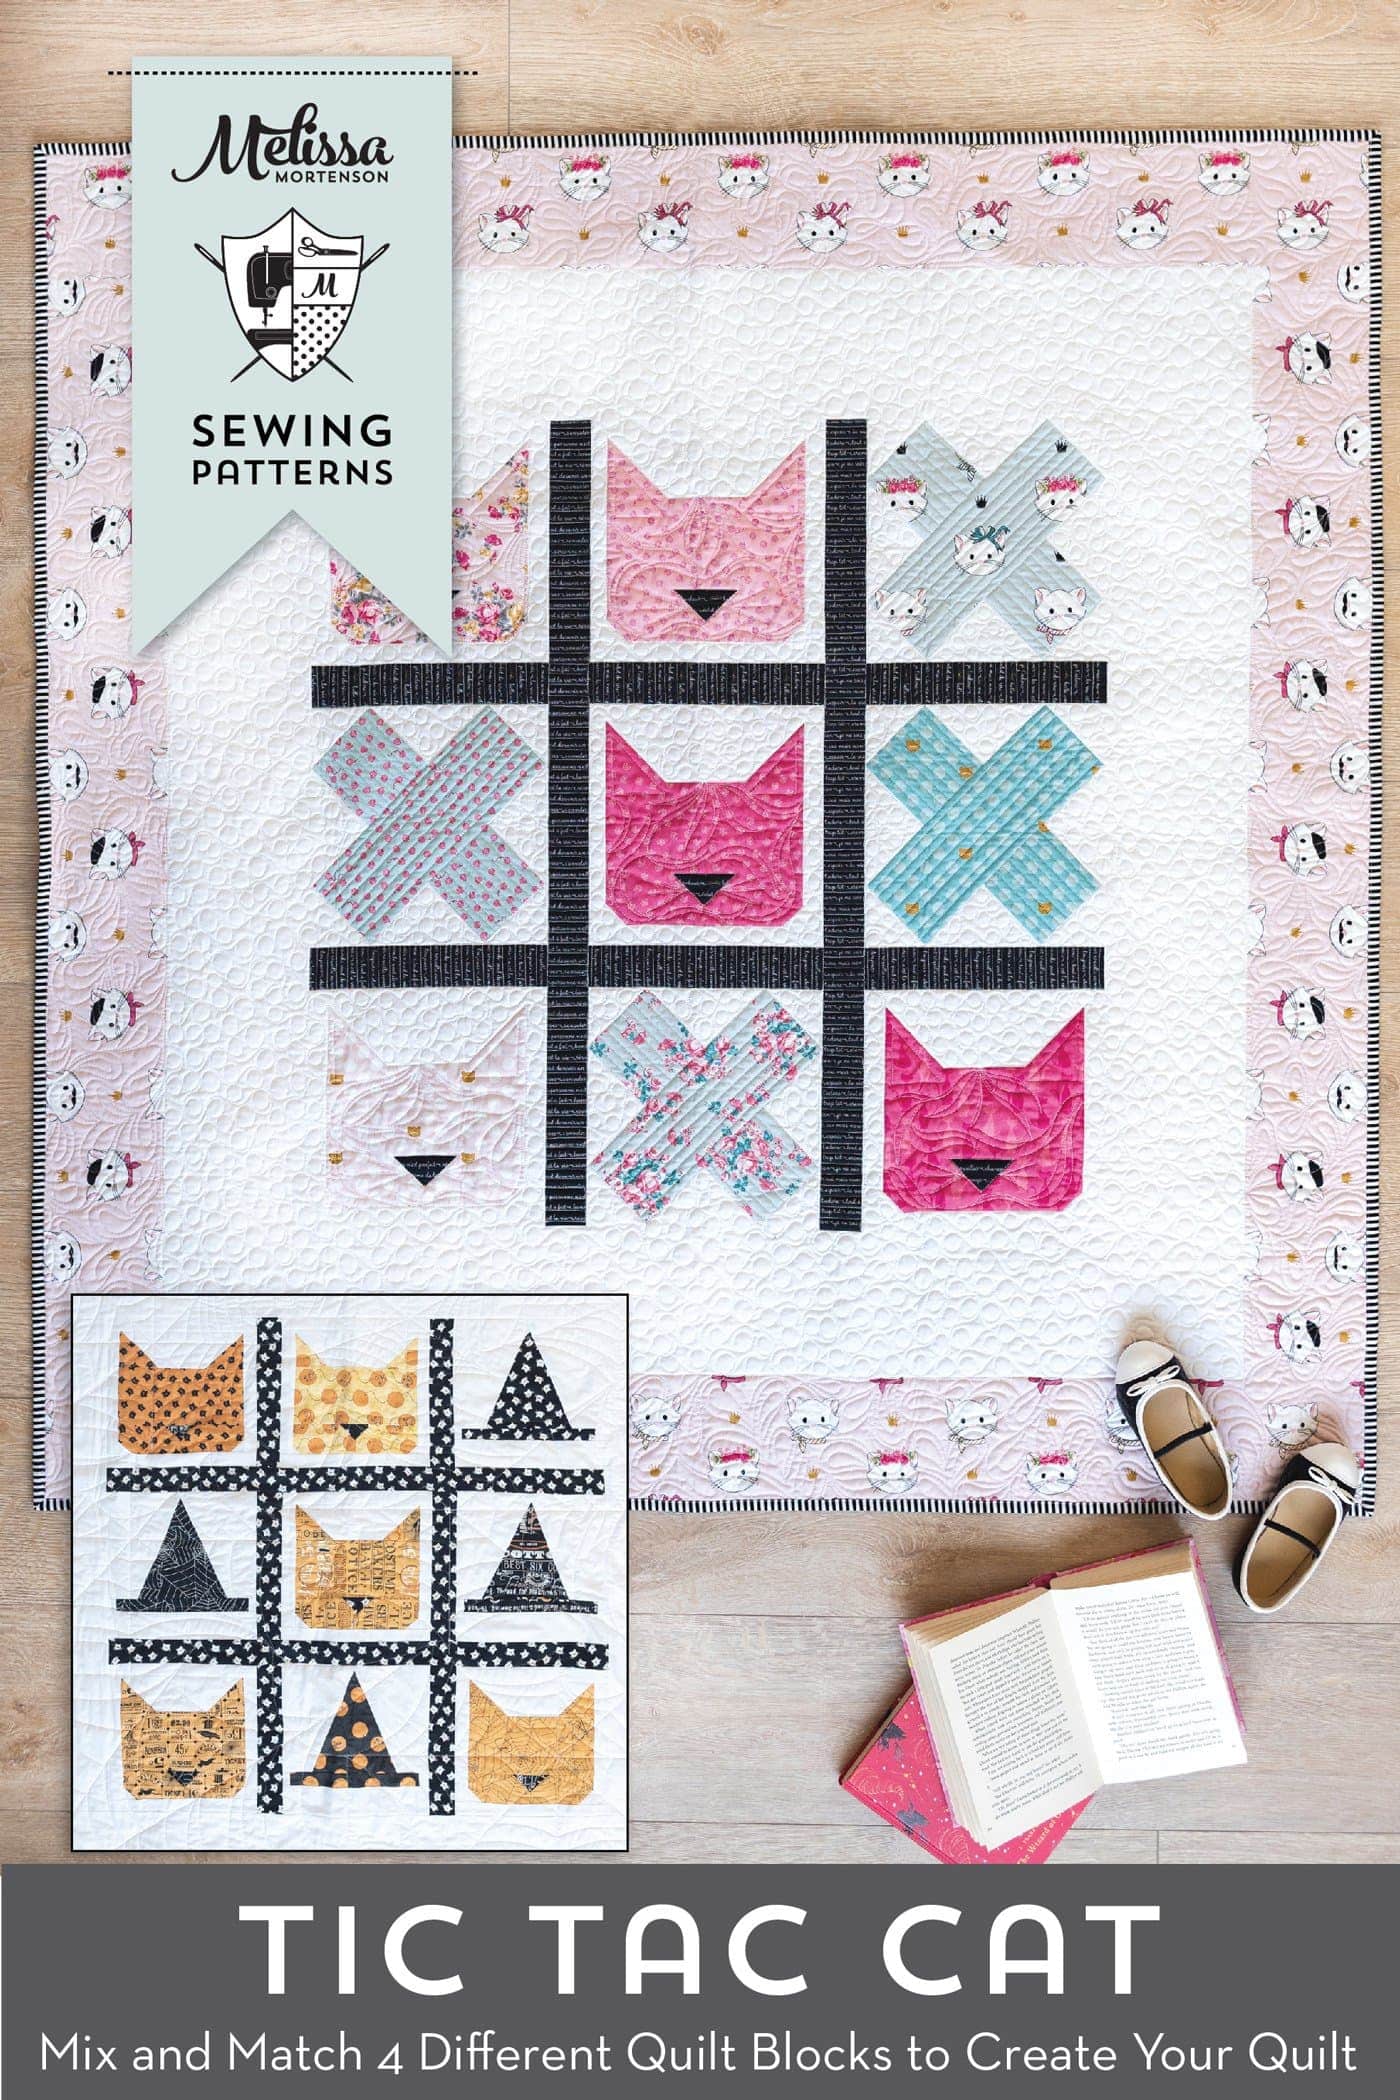 Introducing the Tic Tac Cat Quilt Pattern